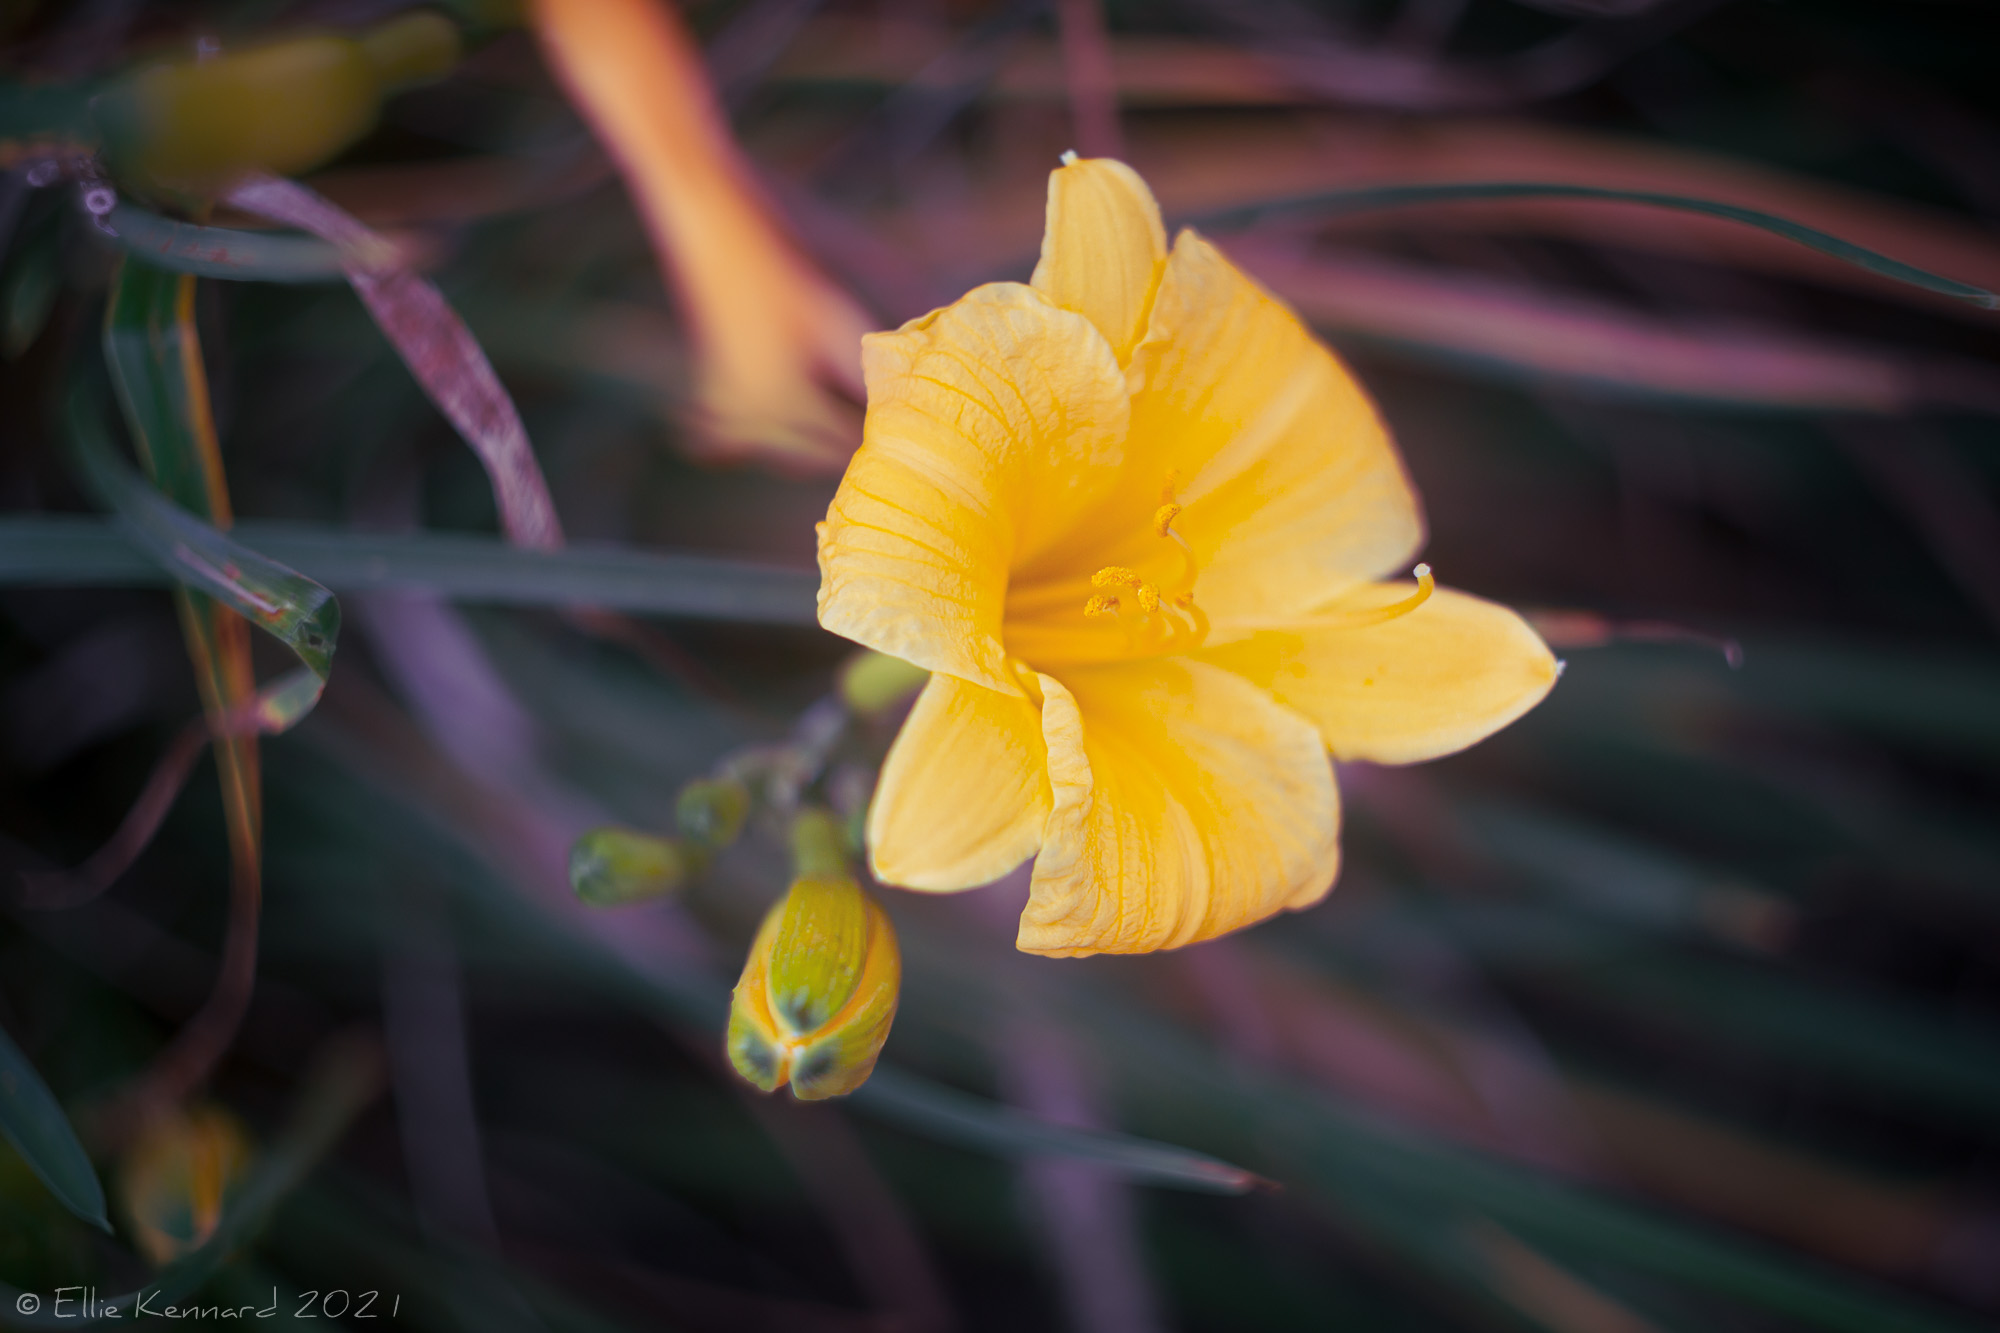 Late Golden Daylily